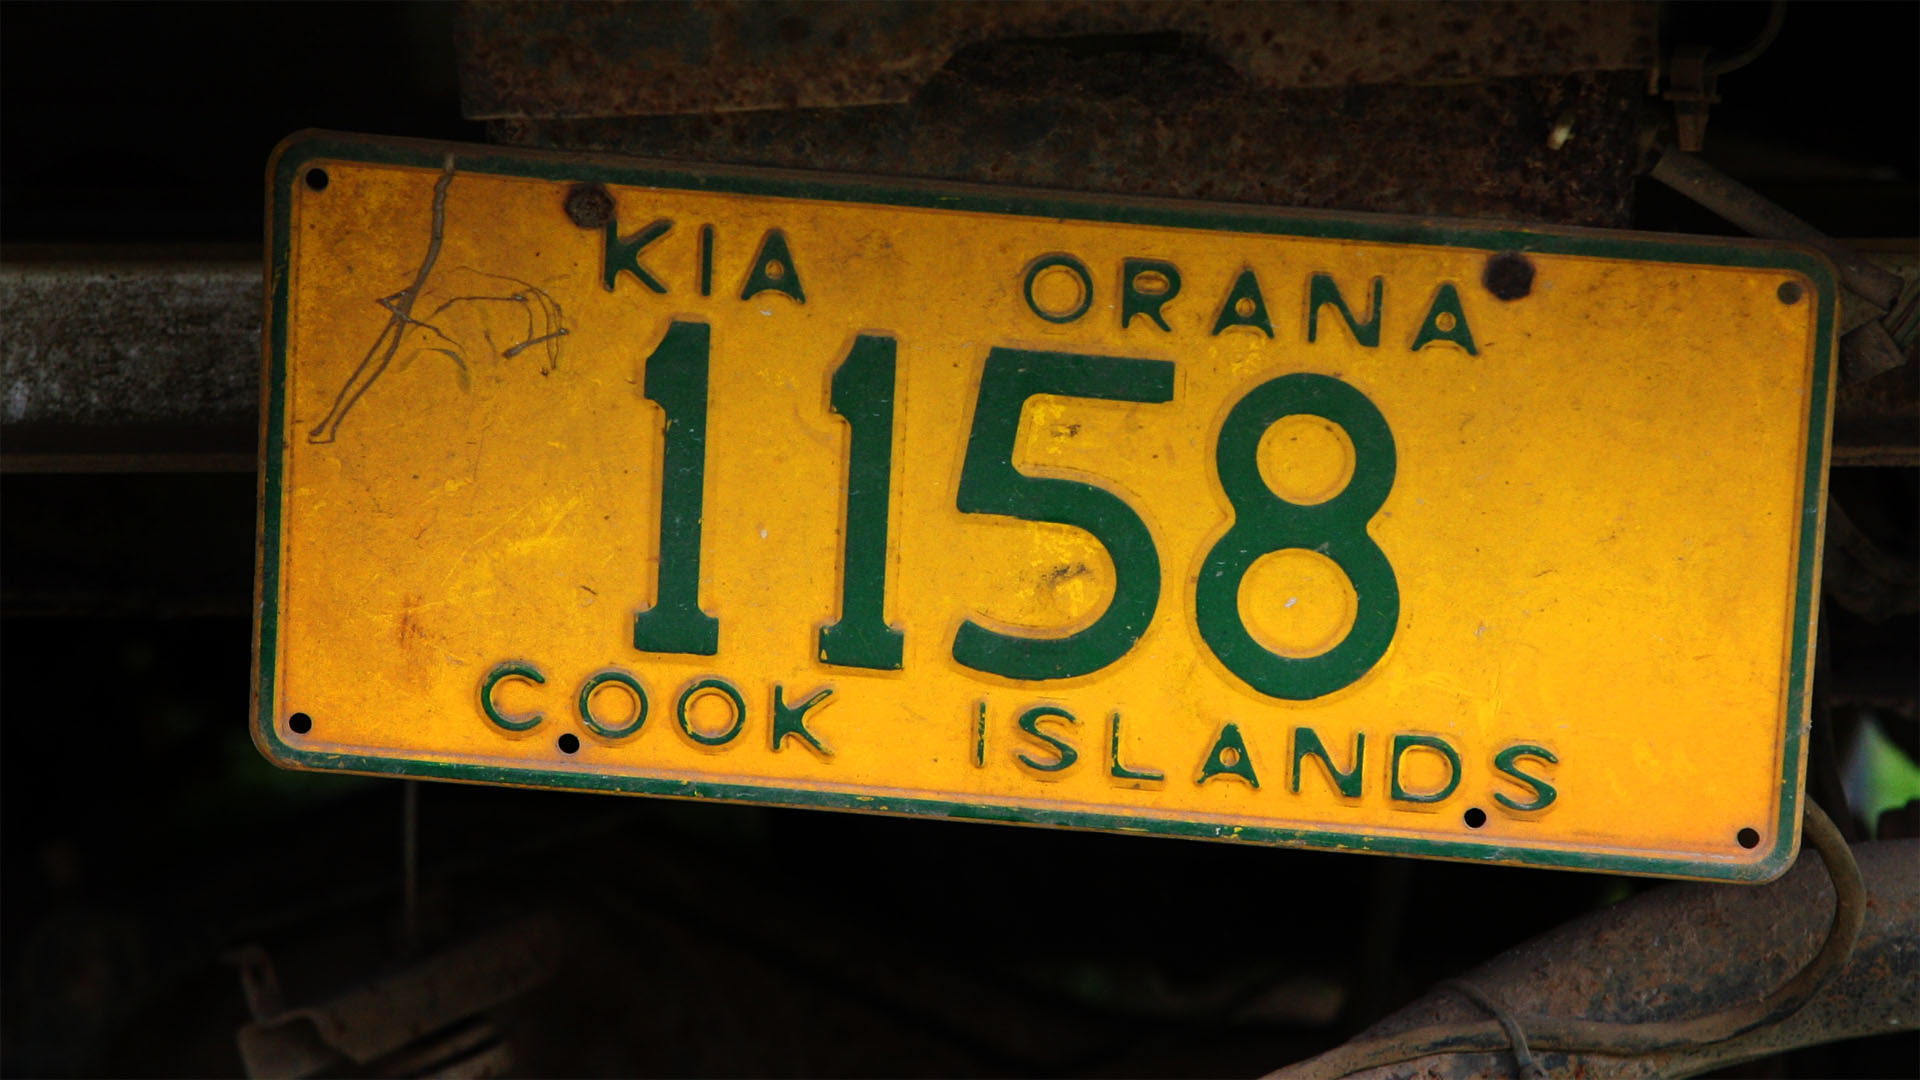 'Welcome' to the Cook Islands / CK